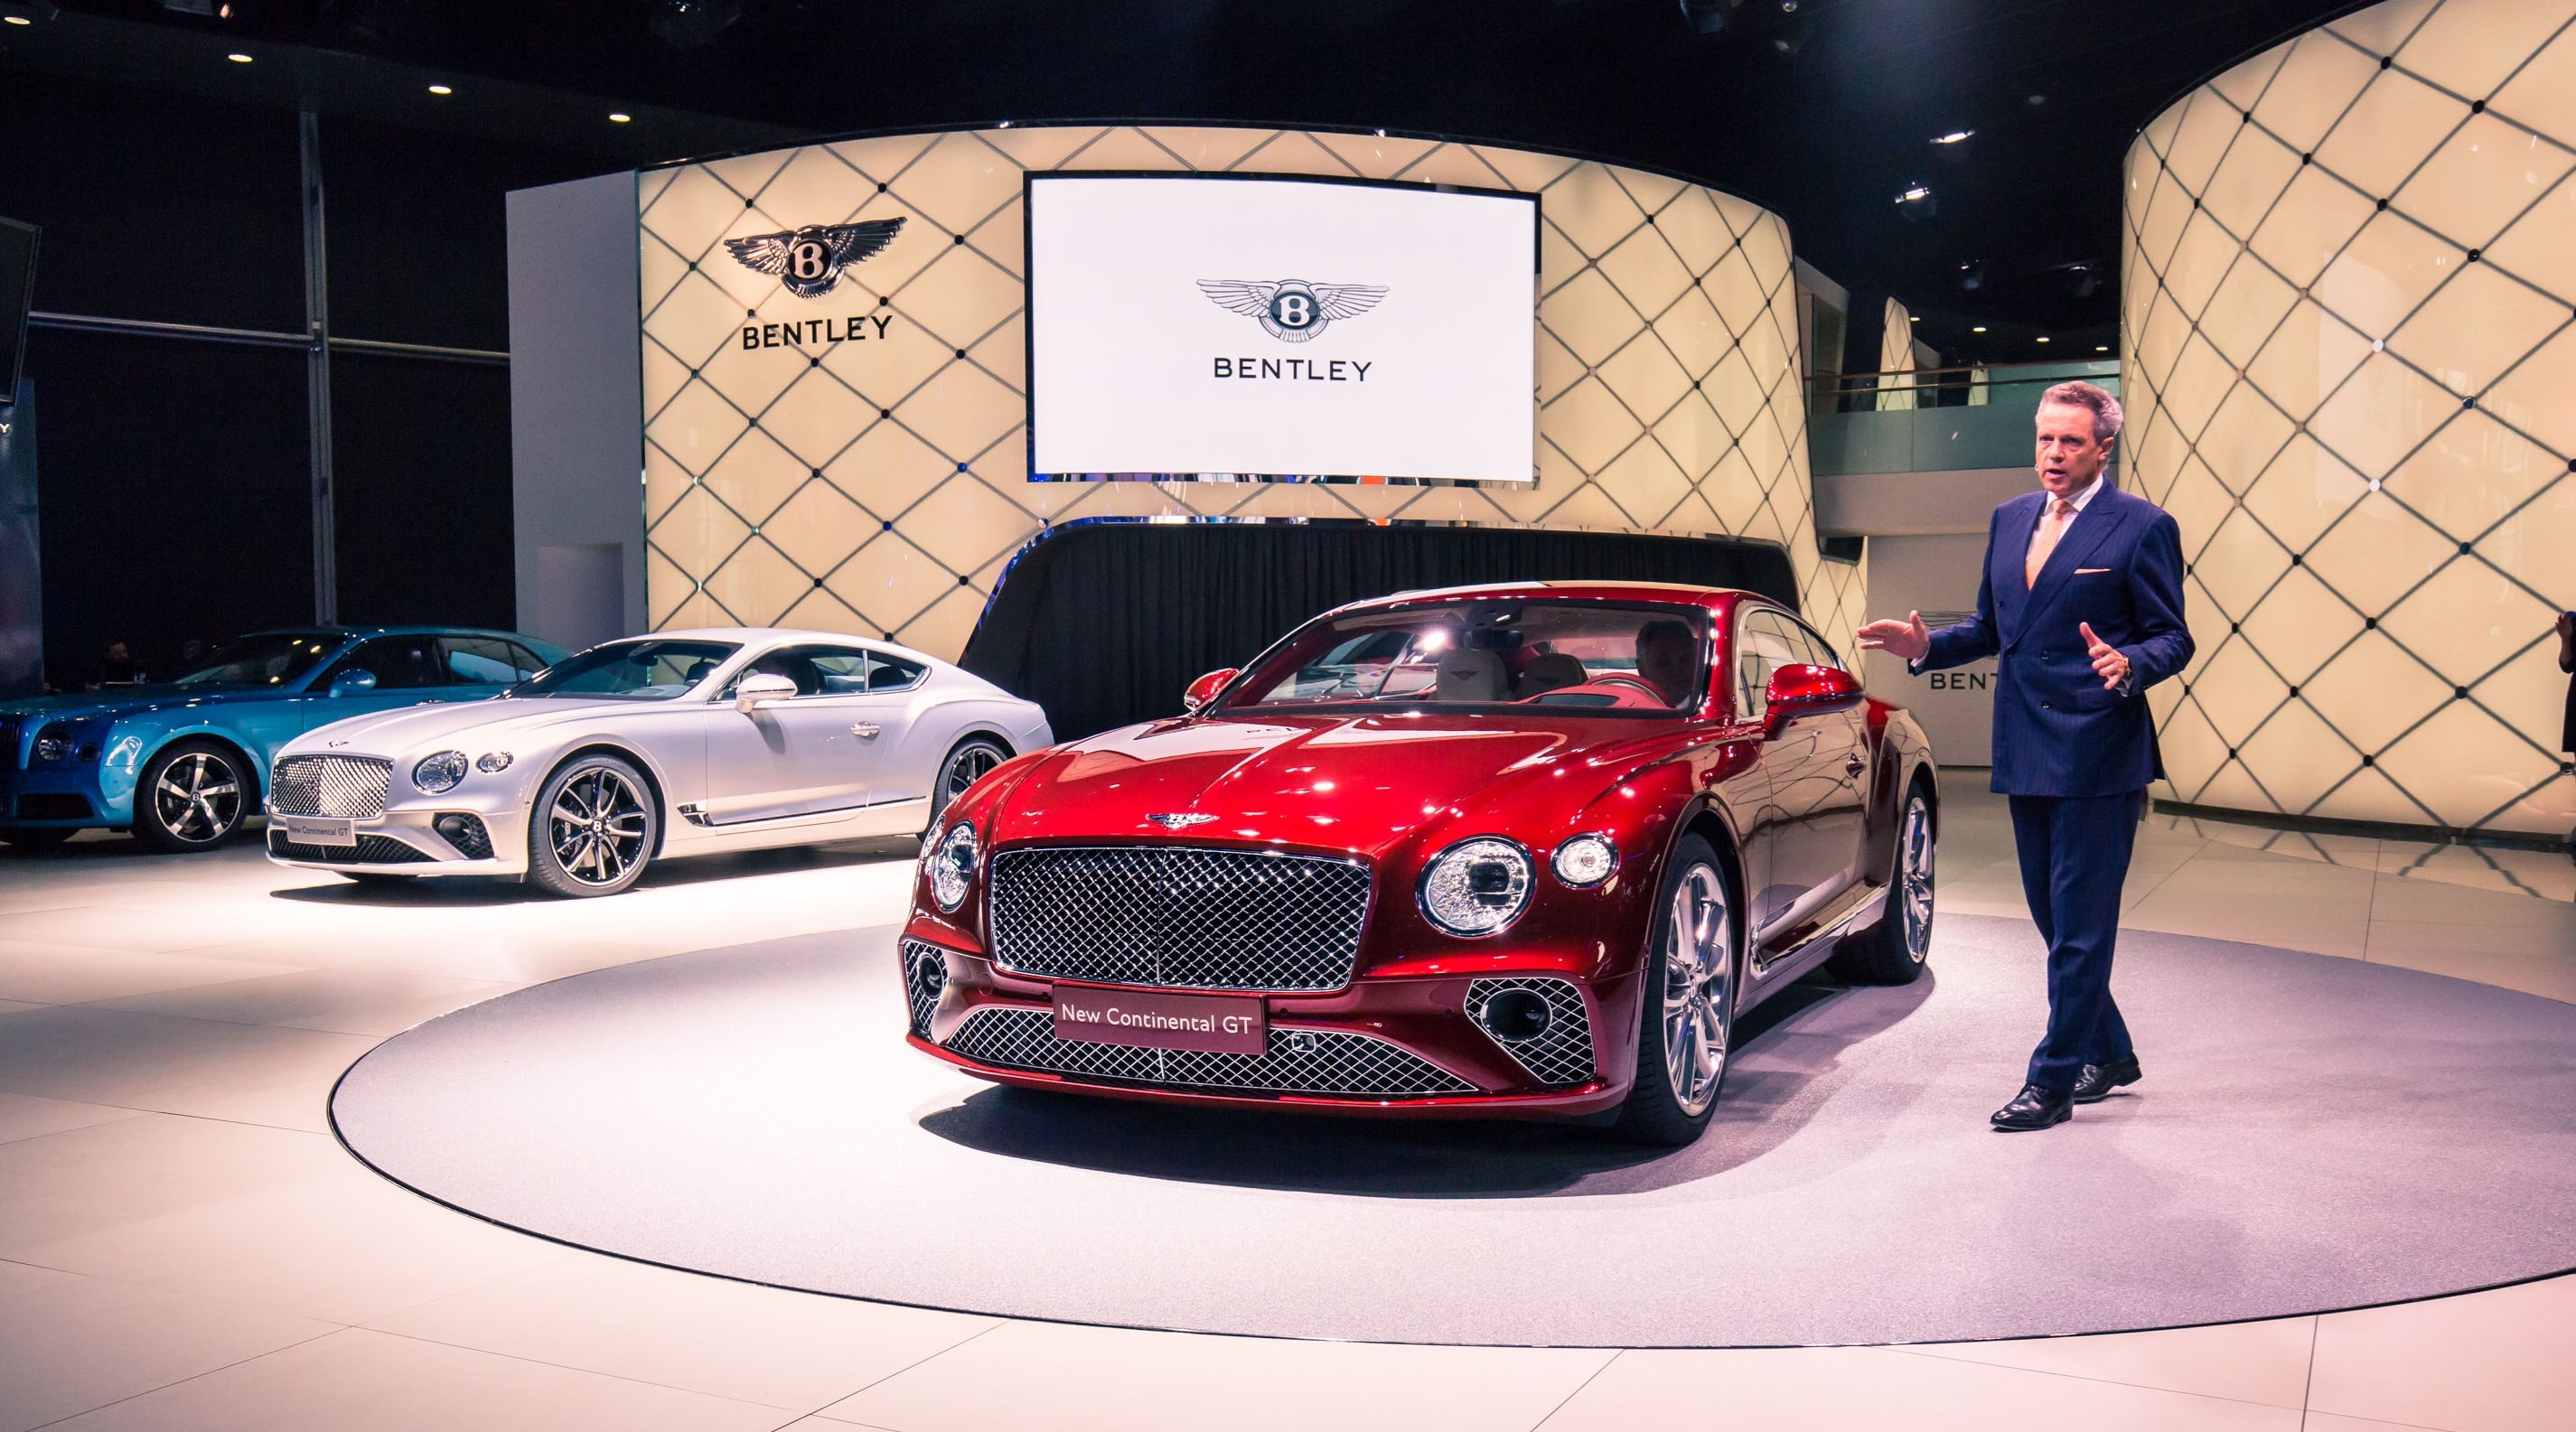 The all-new Continental GT made its global debut at the IAA 2017 in Frankfurt